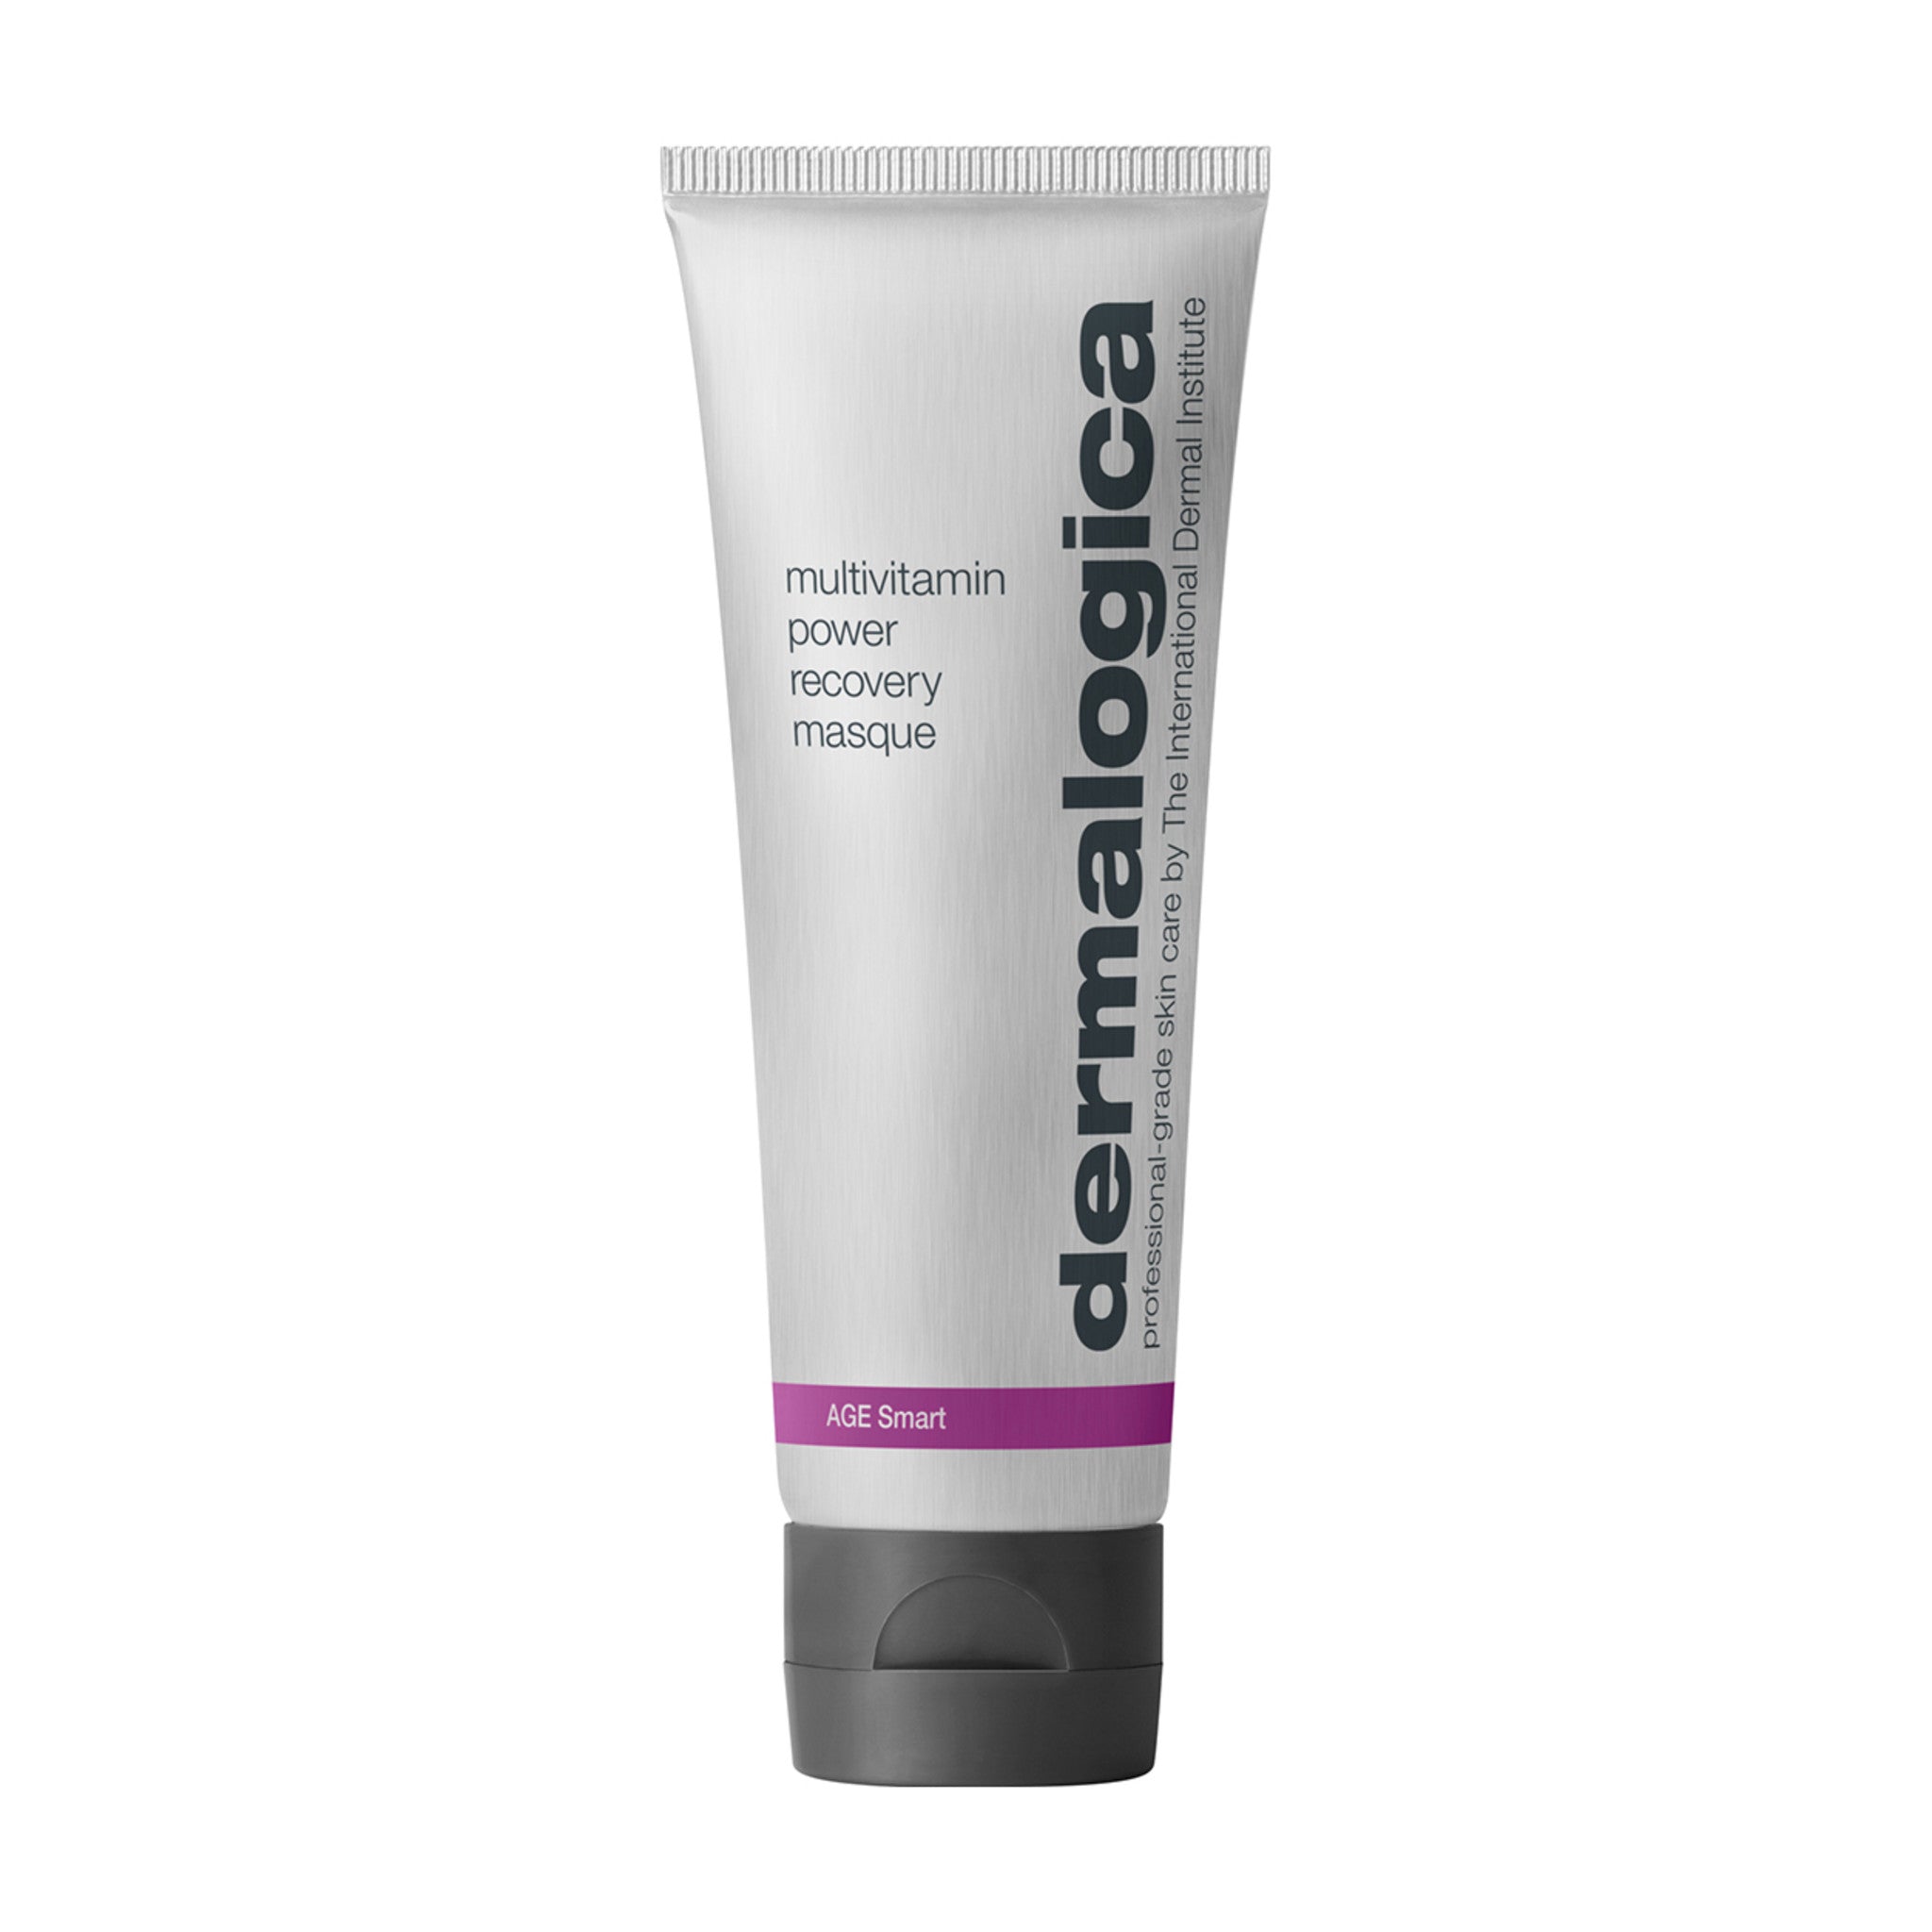 Dermalogica Multivitamin Power Recovery Masque main image.